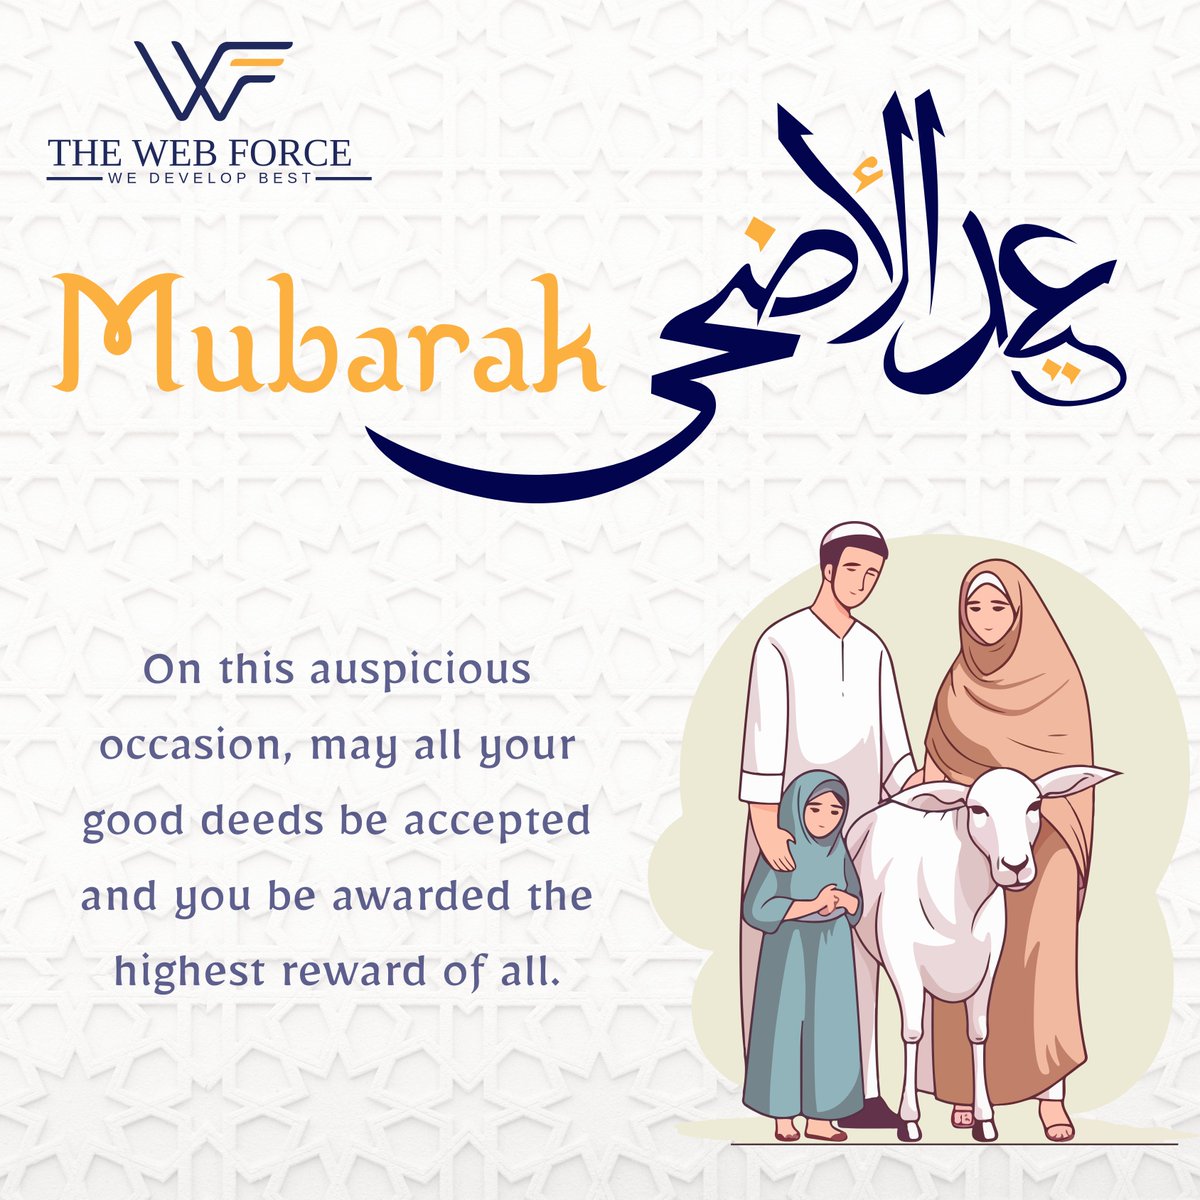 On this auspicious occasion, may all your good deeds be accepted and you be awarded the highest reward of all.

#thewebforce #eidmubarak #eidaladha #eid2023 #eiduladhamubarak #eidmubarak2023 #tech